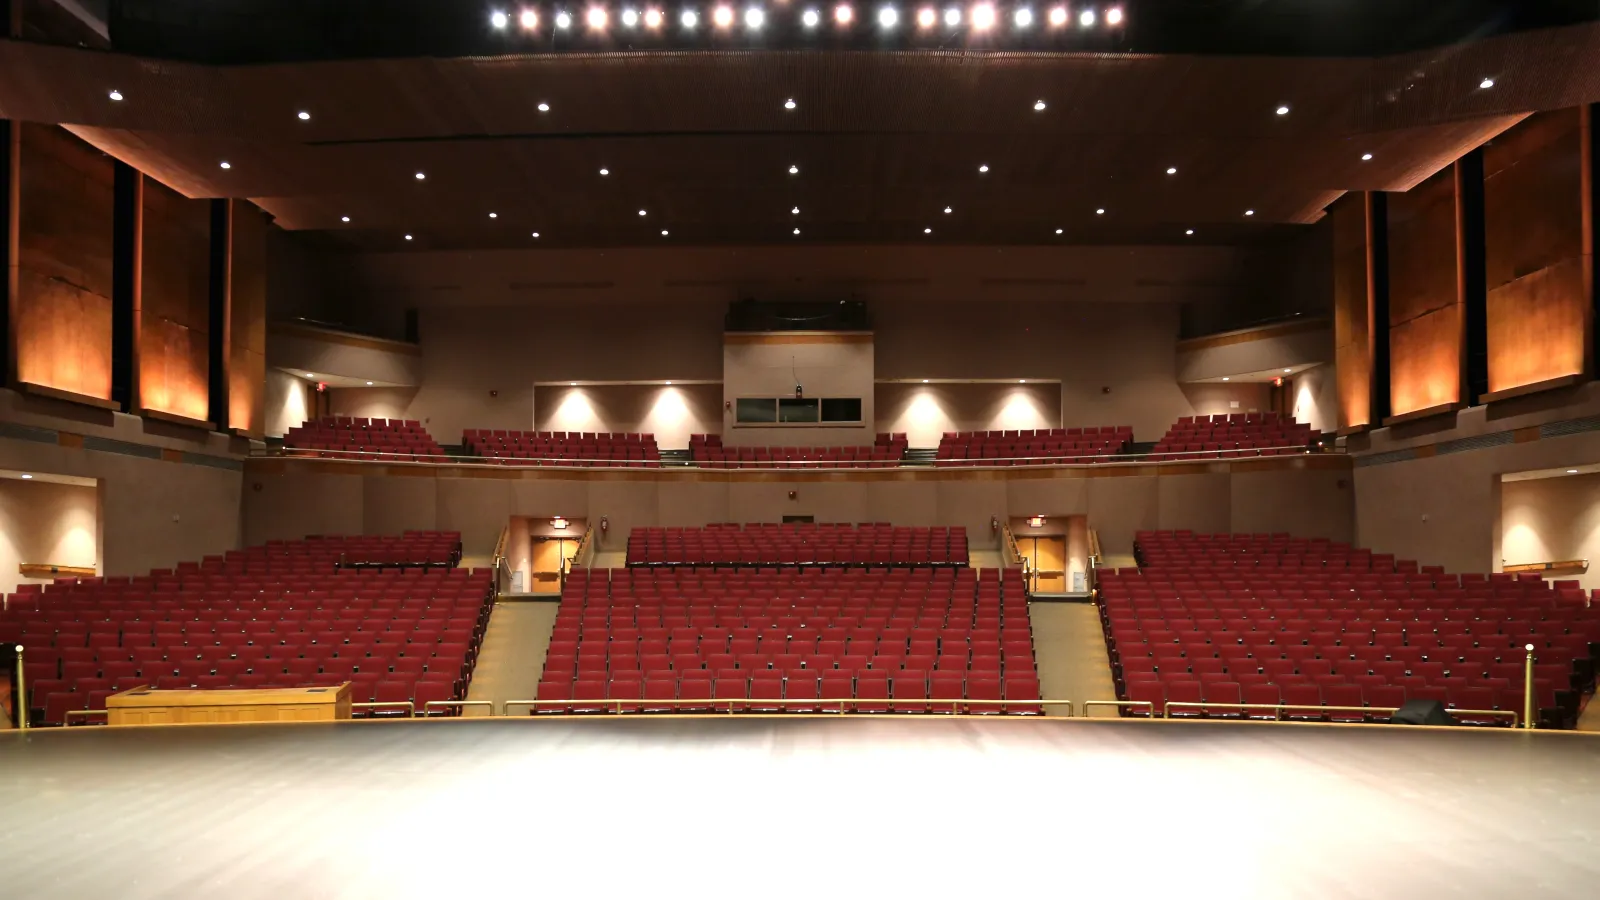 Photo of Margo Jones Hall taken from the stage